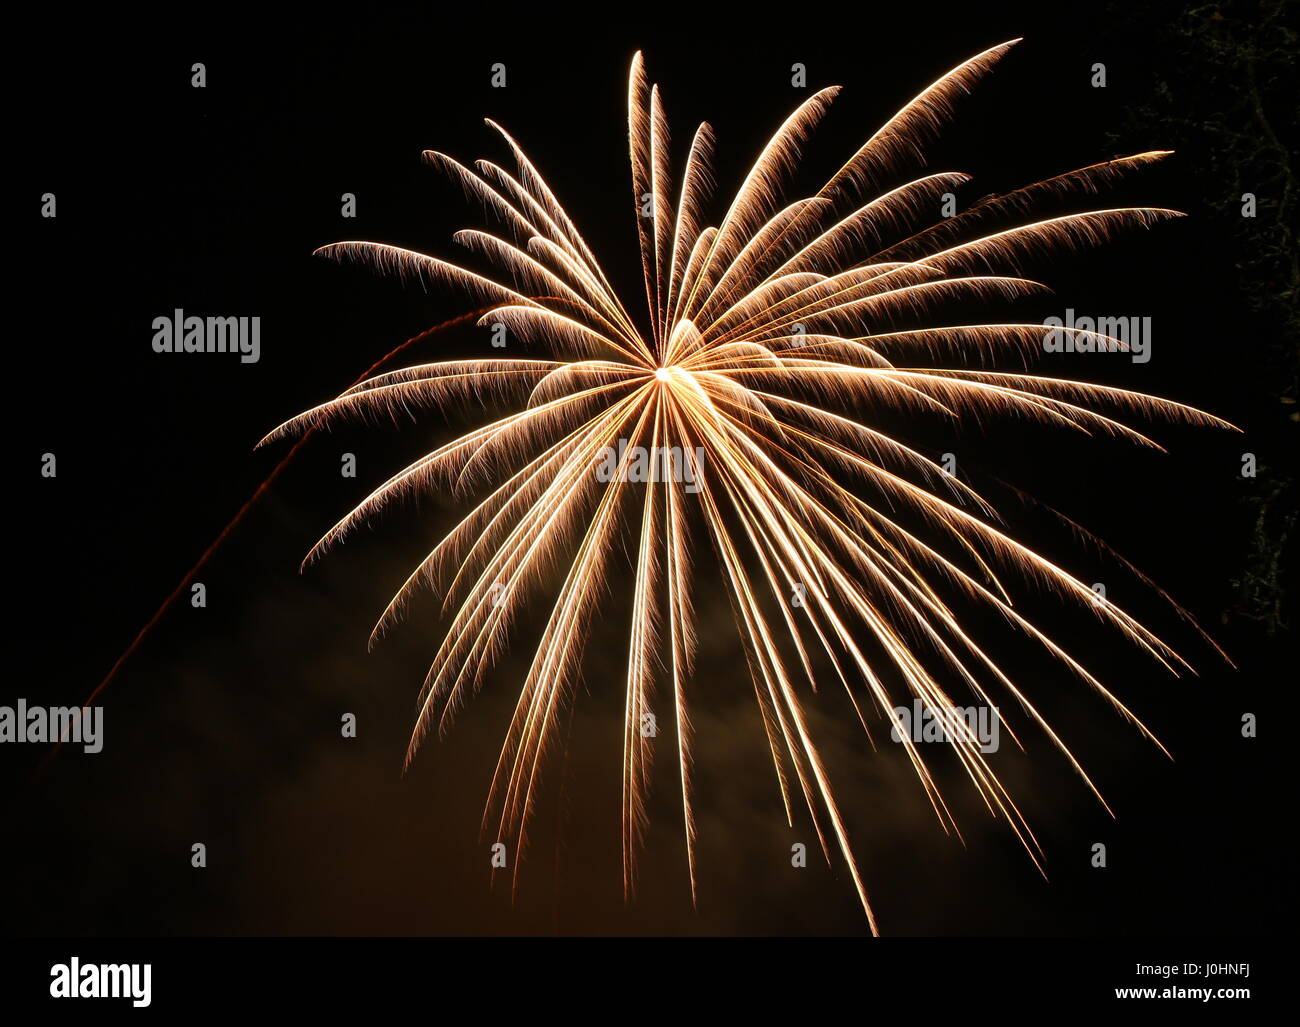 Long exposure photograph of a golden firework burst, against a black night sky background. Light painting photography of a fire work on bonfire night. Stock Photo